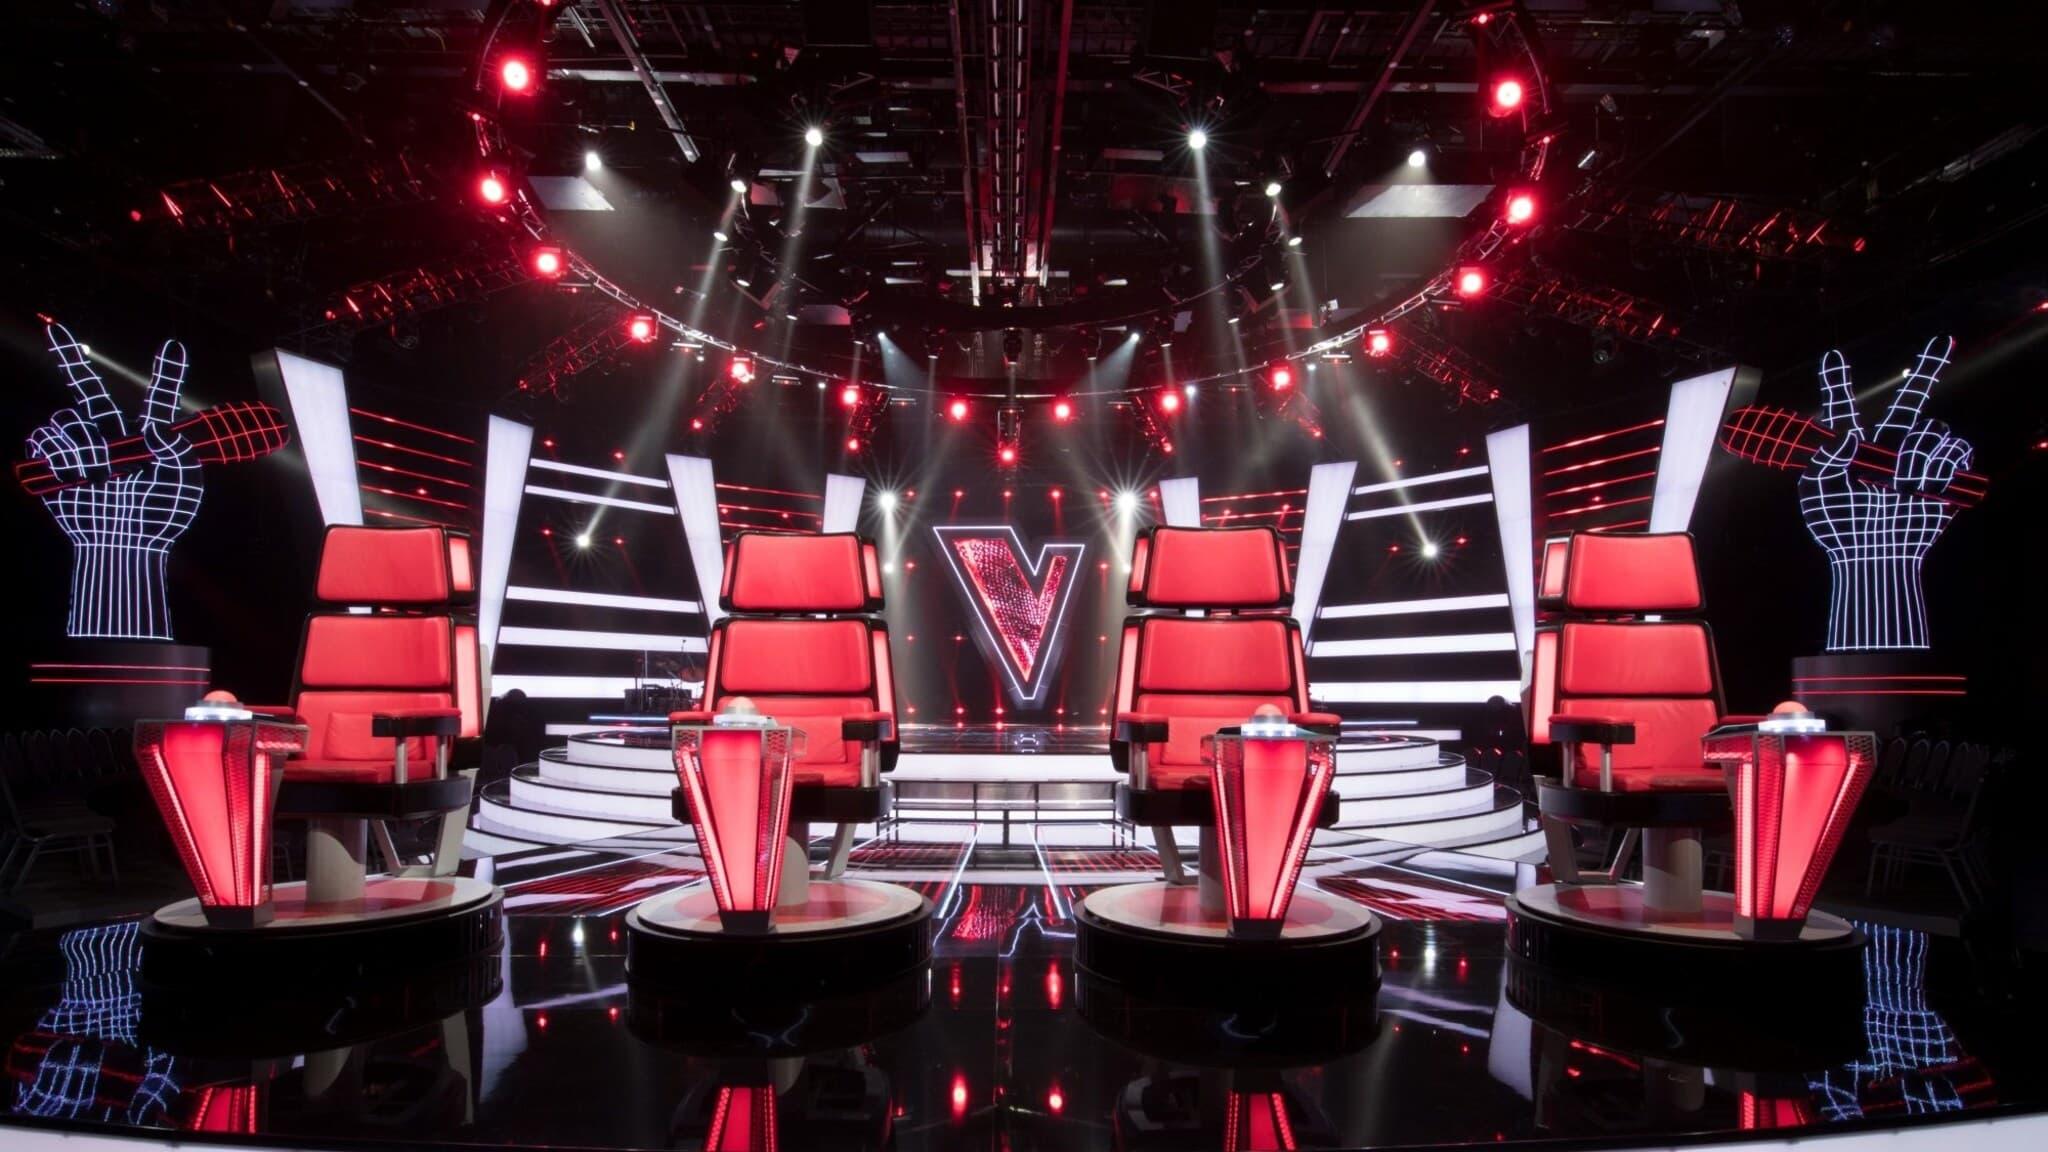 The Voice of Holland backdrop